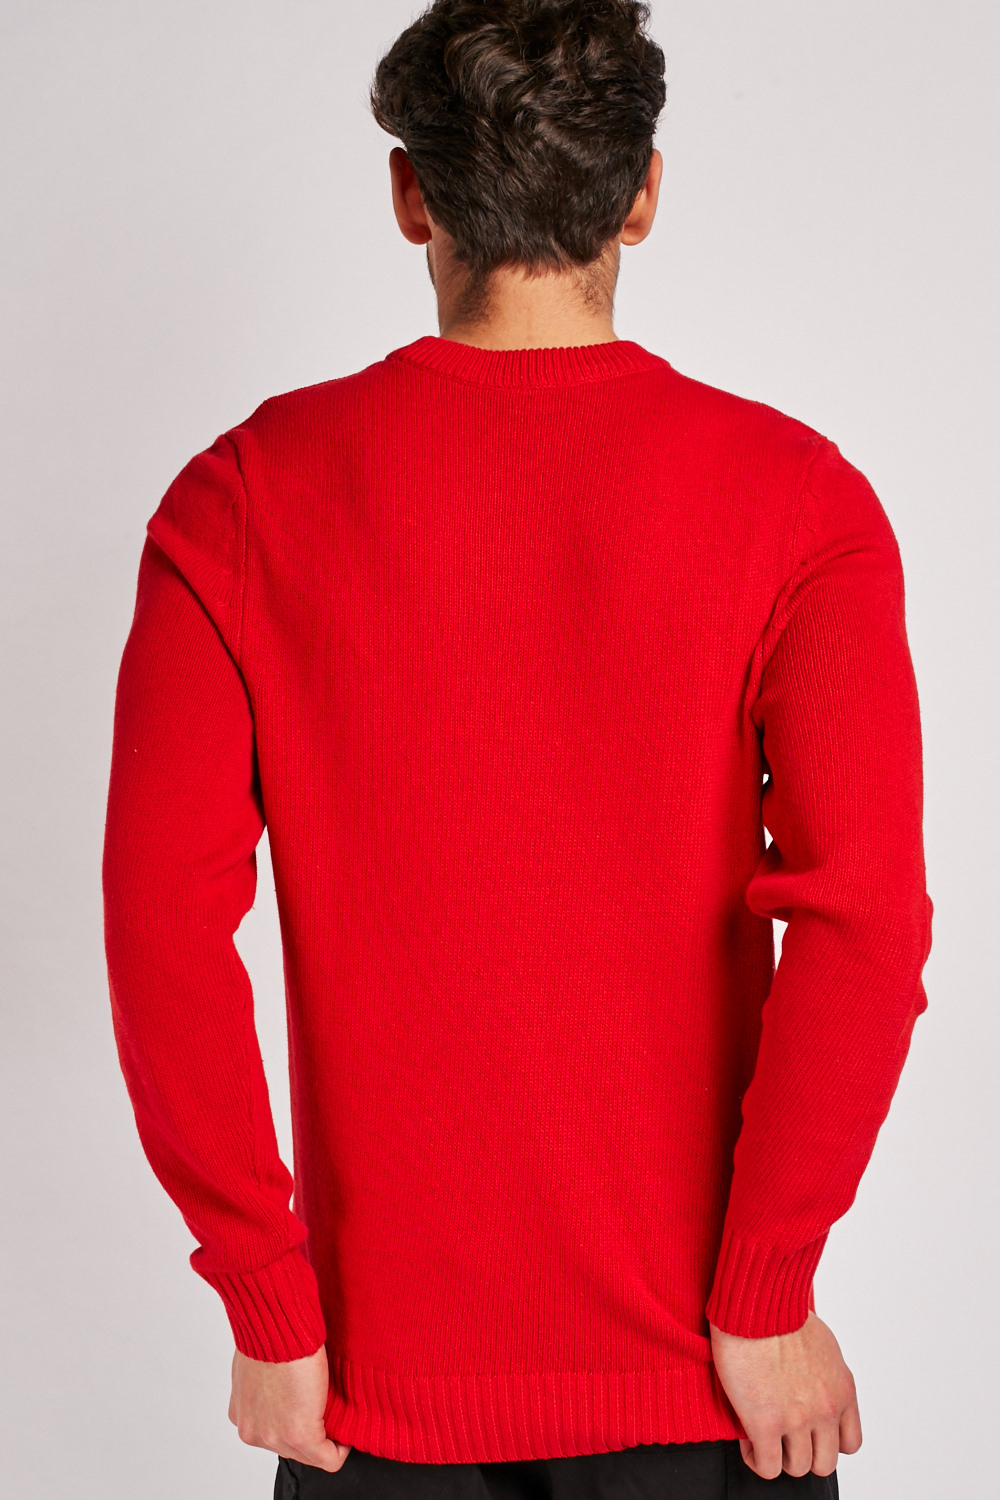 Crew Neck Red Knit Jumper - Just $7